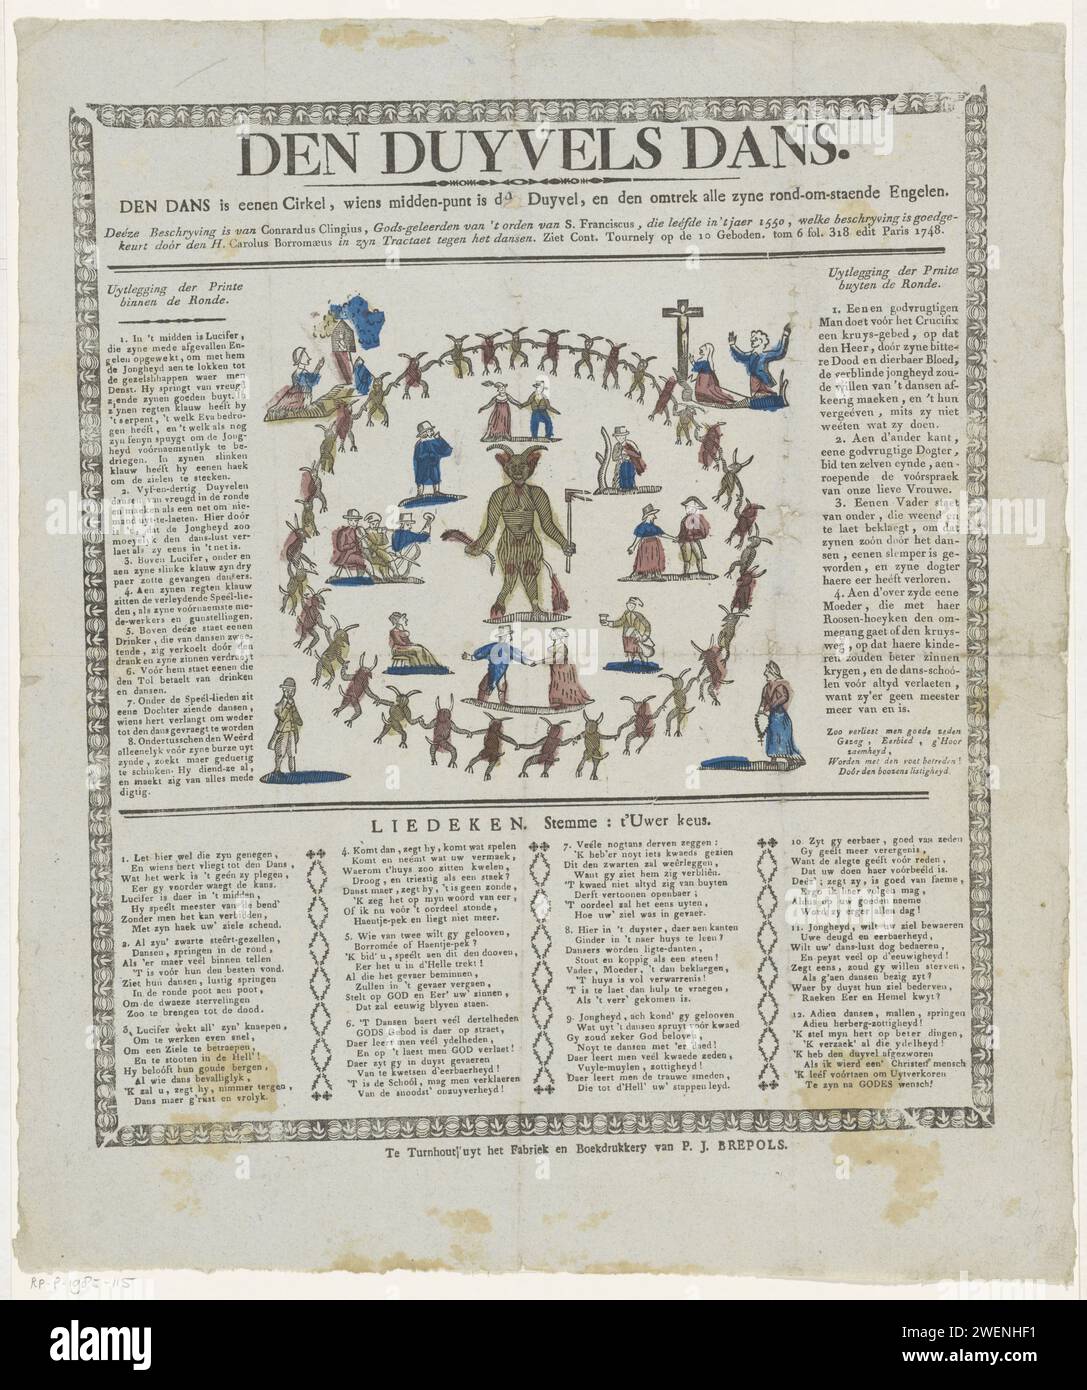 Den Duyvels in, 1800 - 1833 print A circle of dancing devils with dancing and musician farmers and a large devil. People pray around the circle. The show is surrounded by text in book print. Completely surrounded by a decorative frame.  paper letterpress printing devil(s) and demons. group dancing Stock Photo